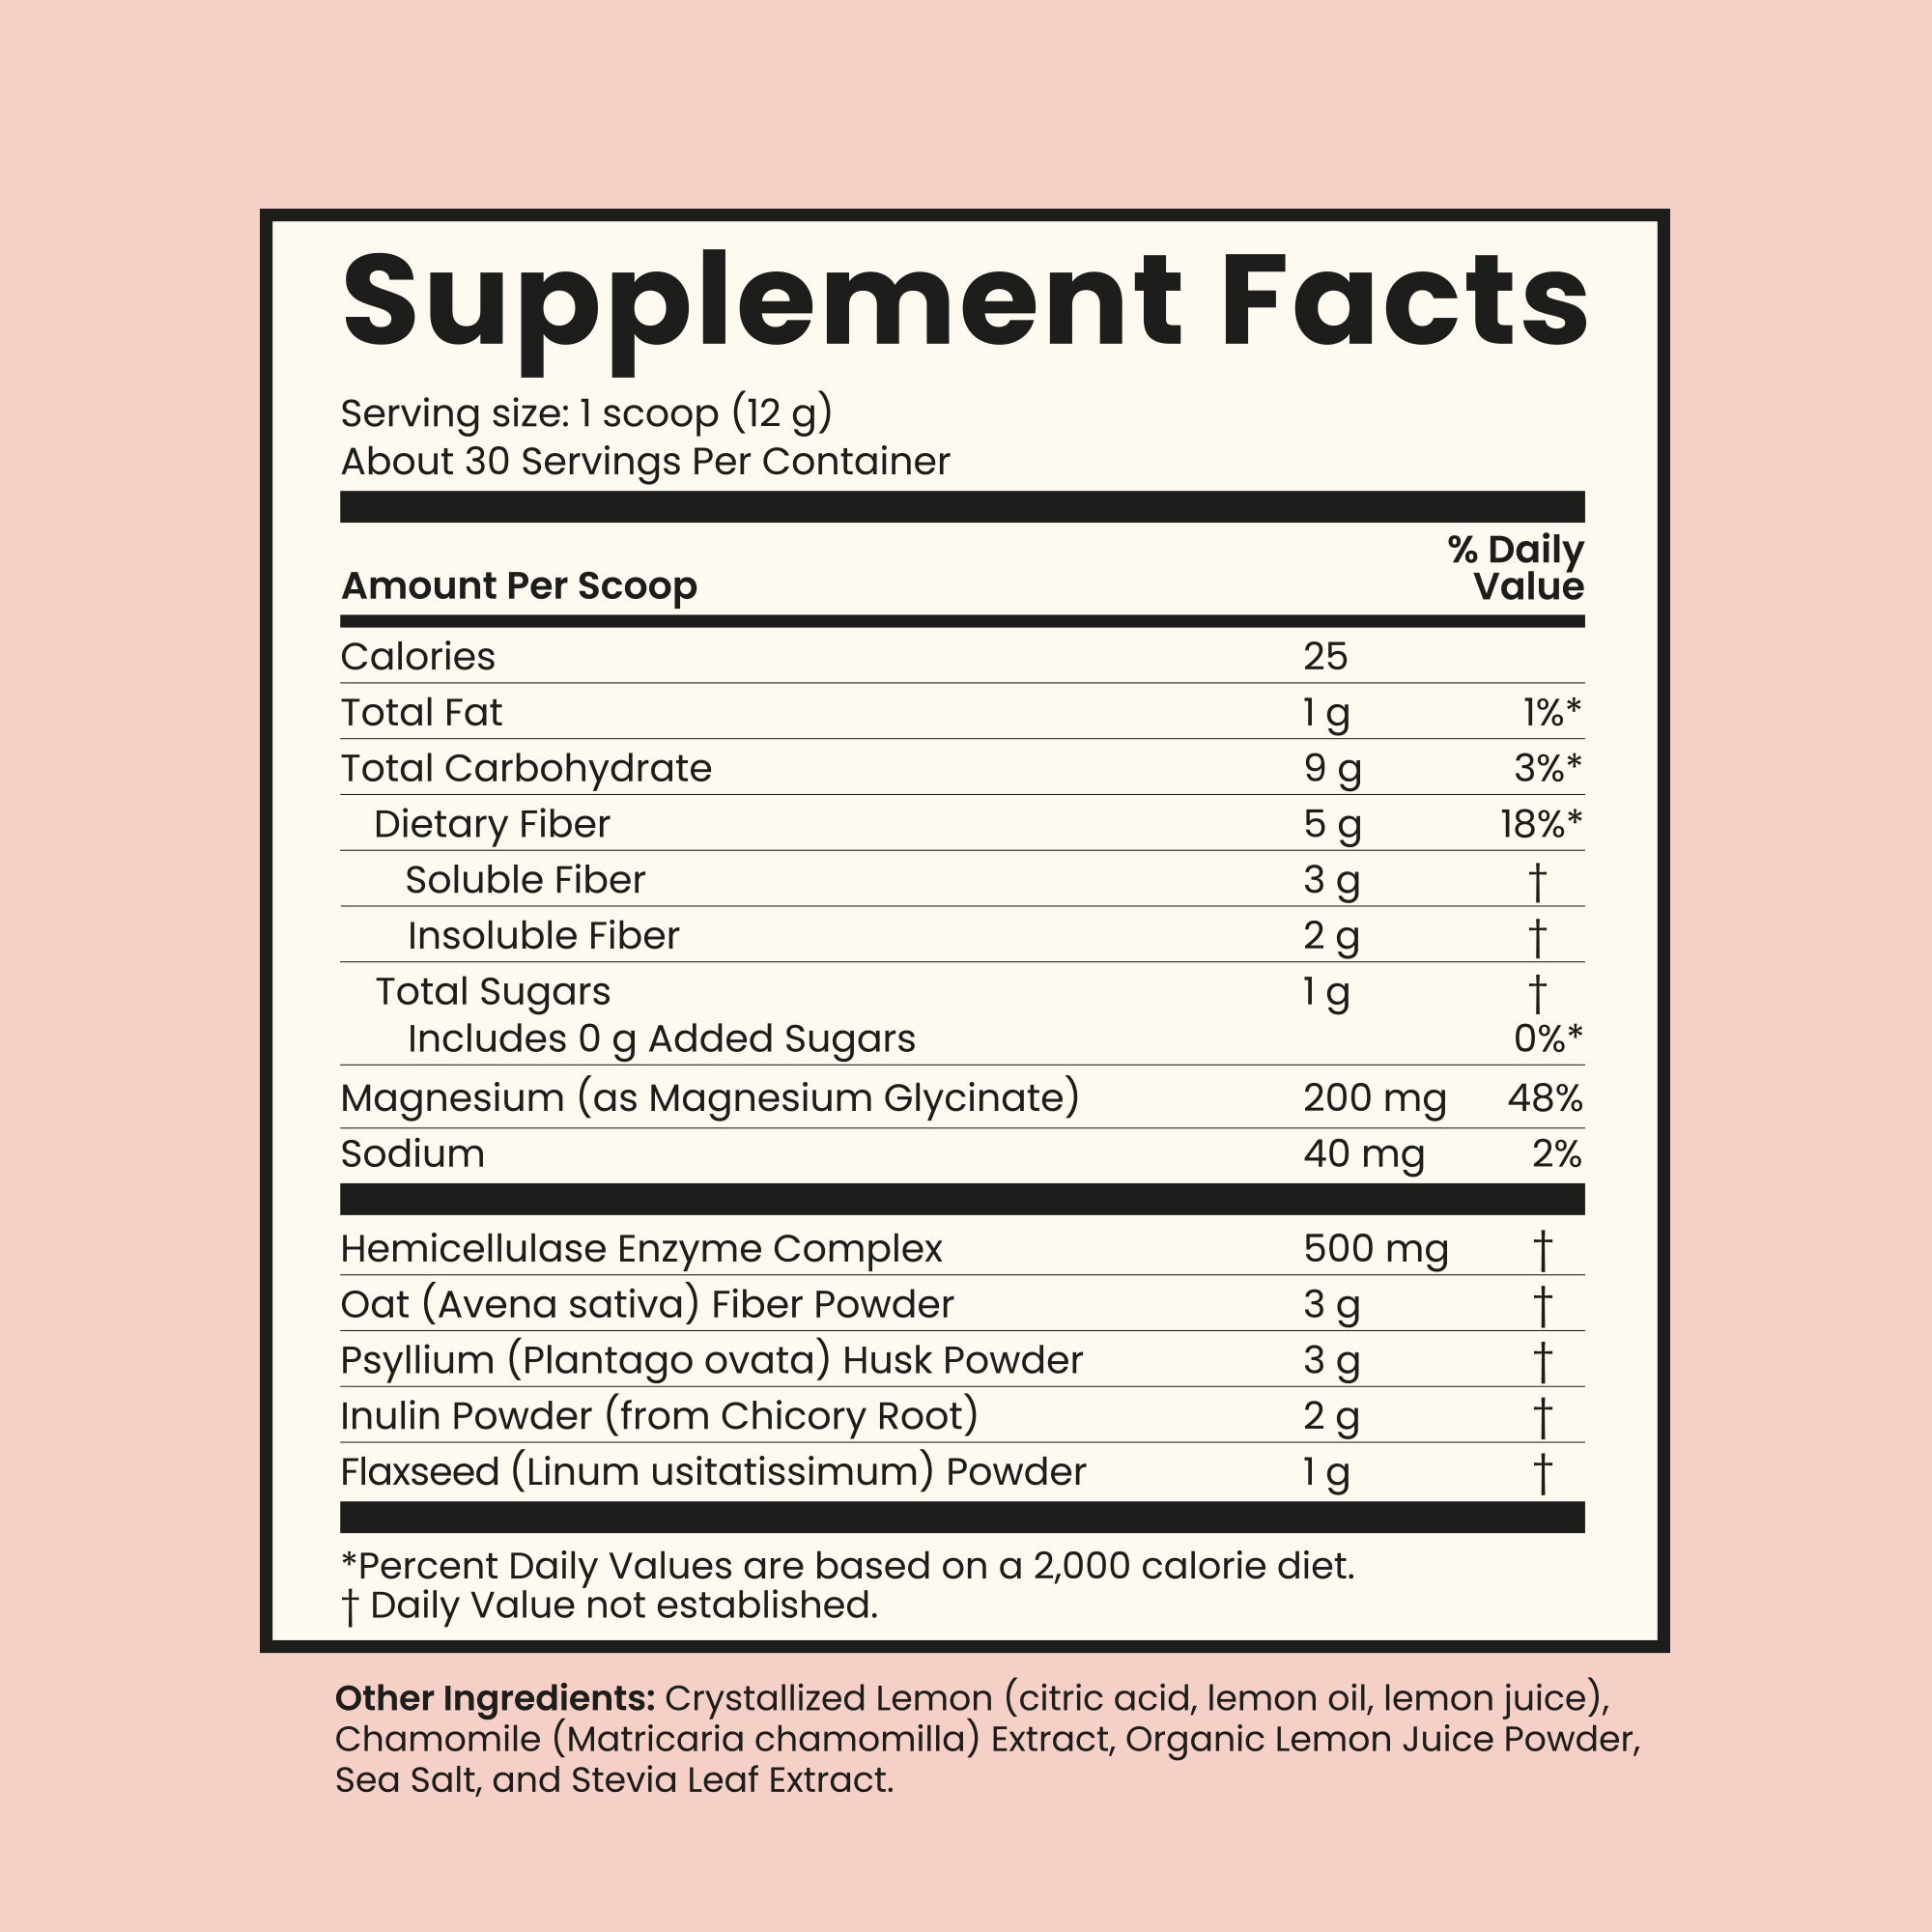 YayDay - YayDay supplements facts